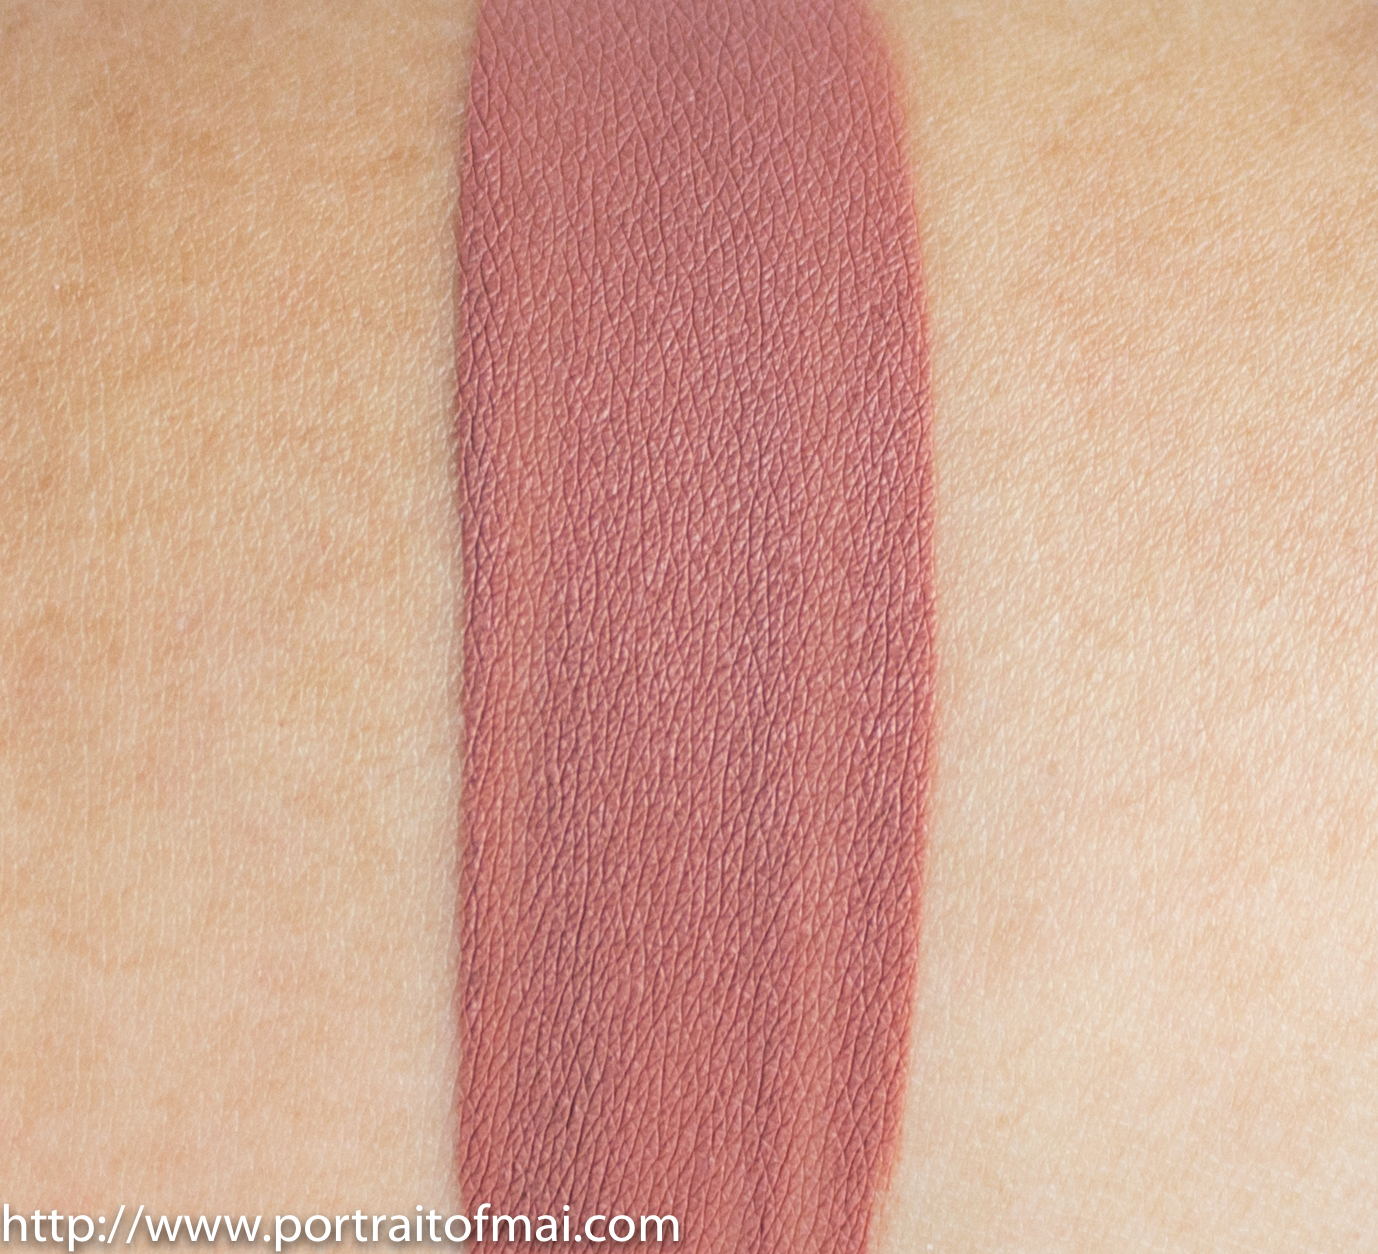 Smashbox Always On Liquid Lipstick in Stepping Out Swatch and Review